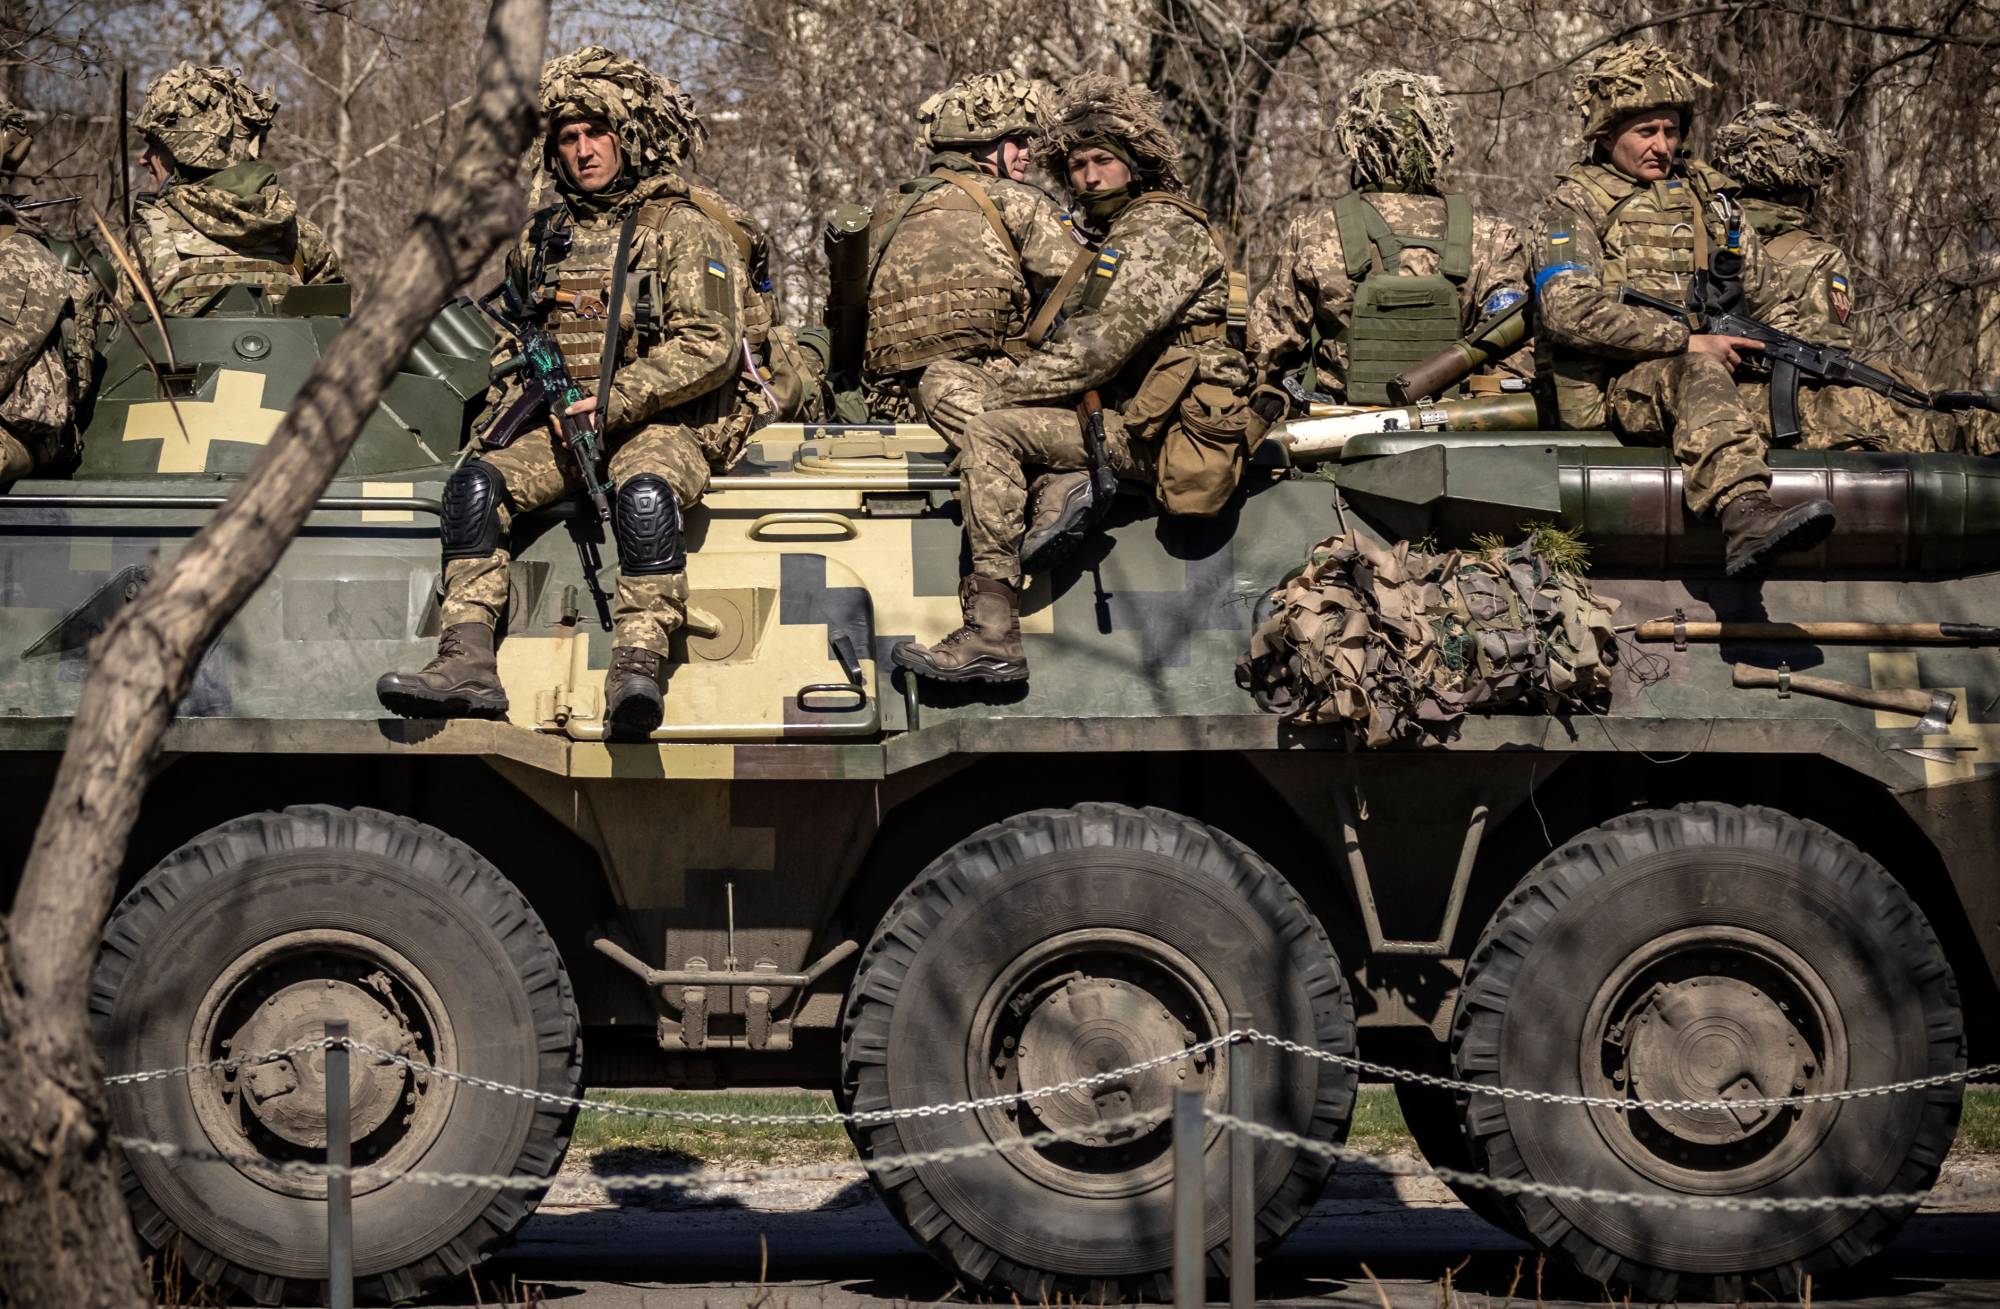 Ukrainian soldiers on top of an armored vehicle